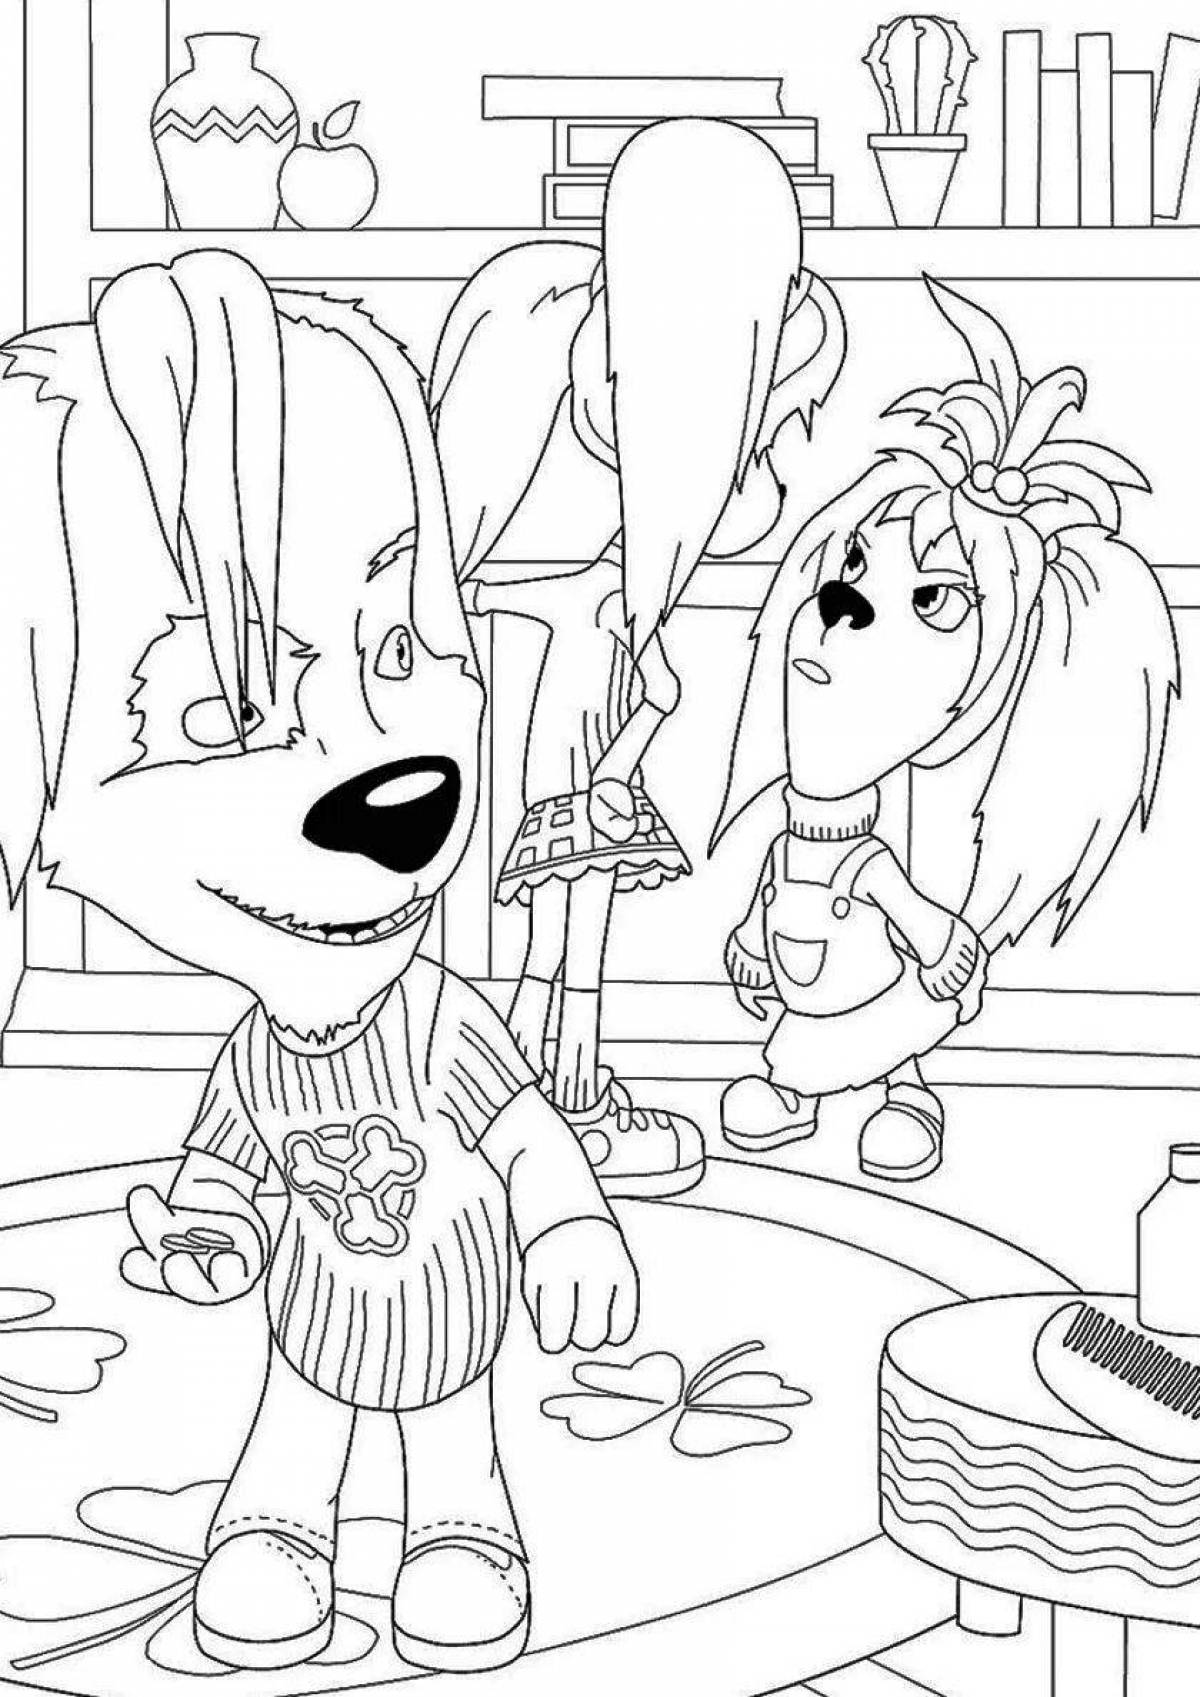 Funny barboskins all coloring pages